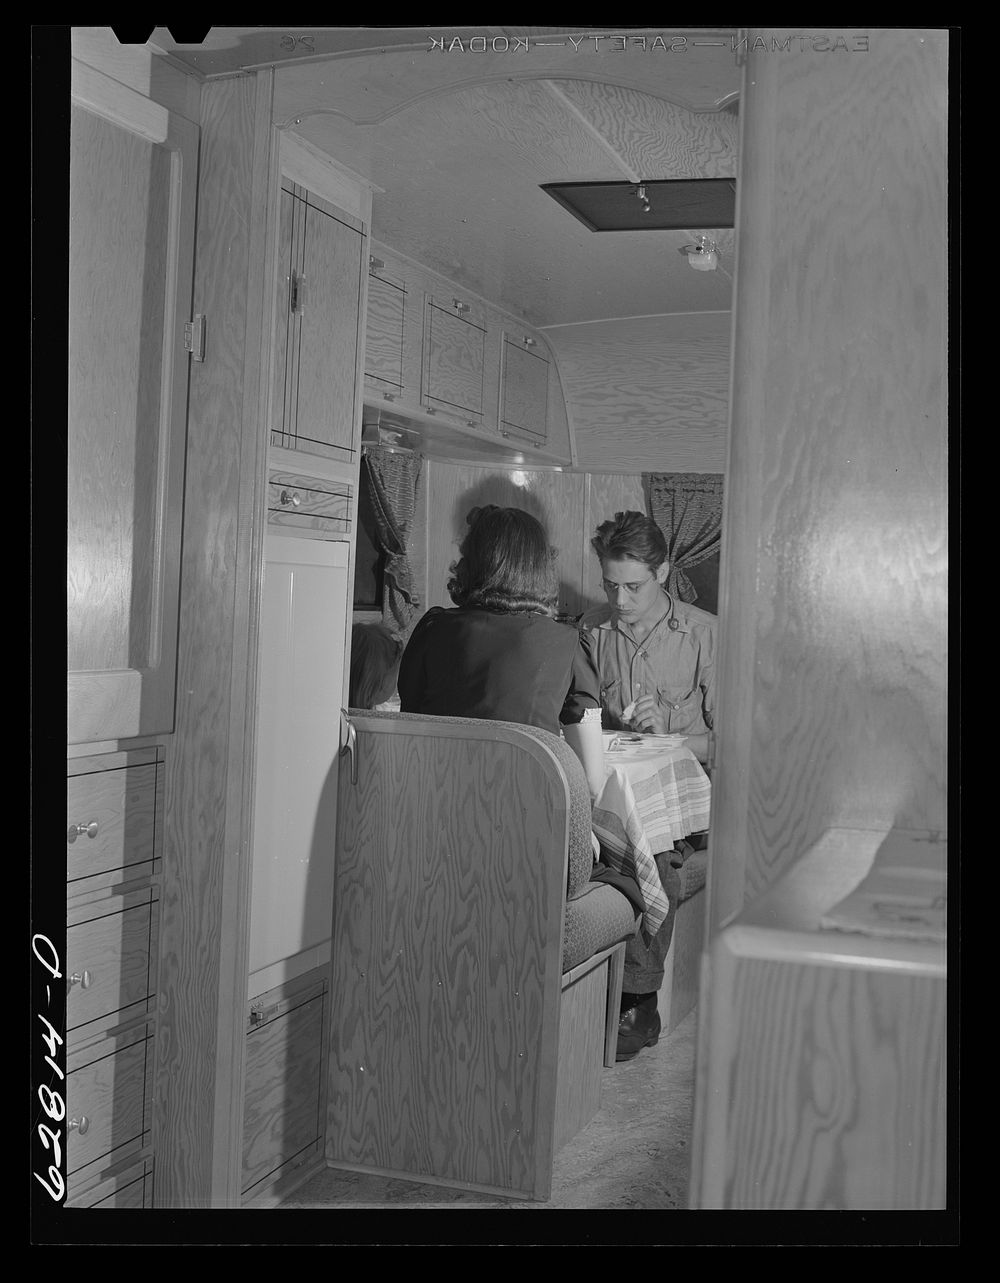 [Untitled photo, possibly related to: Jack Cutter and family at dinner. FSA (Farm Security Administration) trailer camp.…